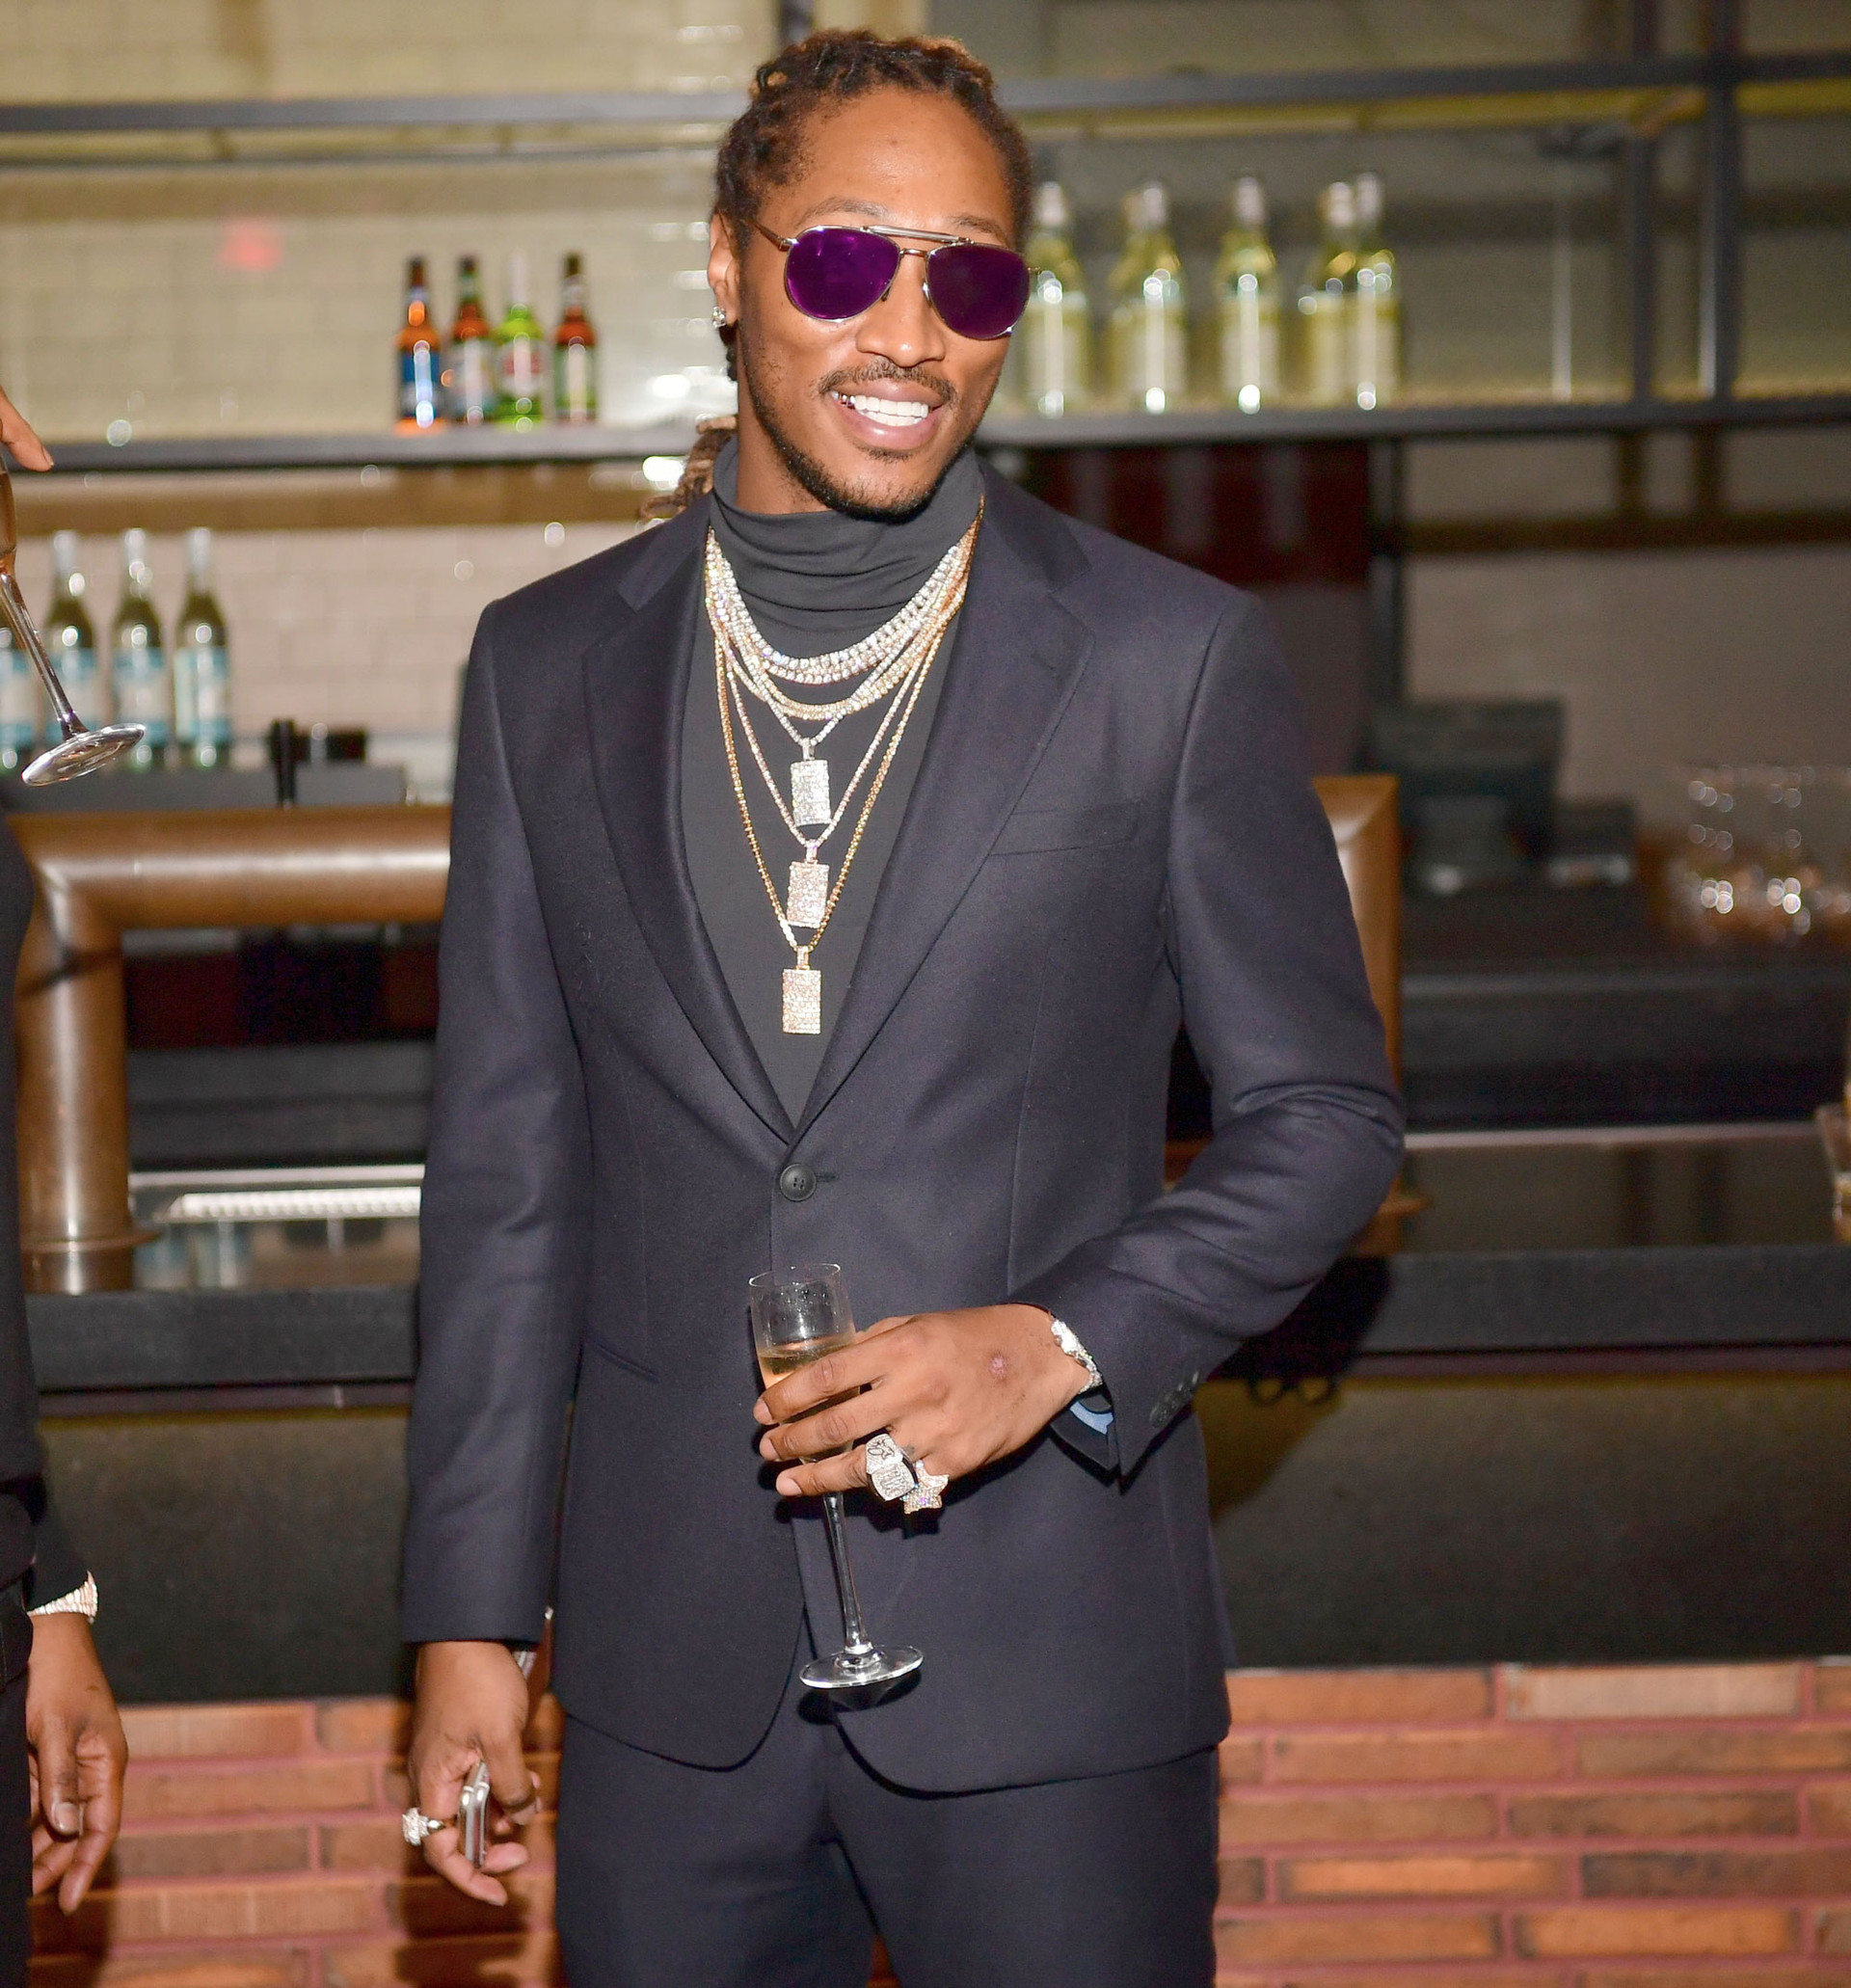 Future: 25 Things You Don't Know About Me